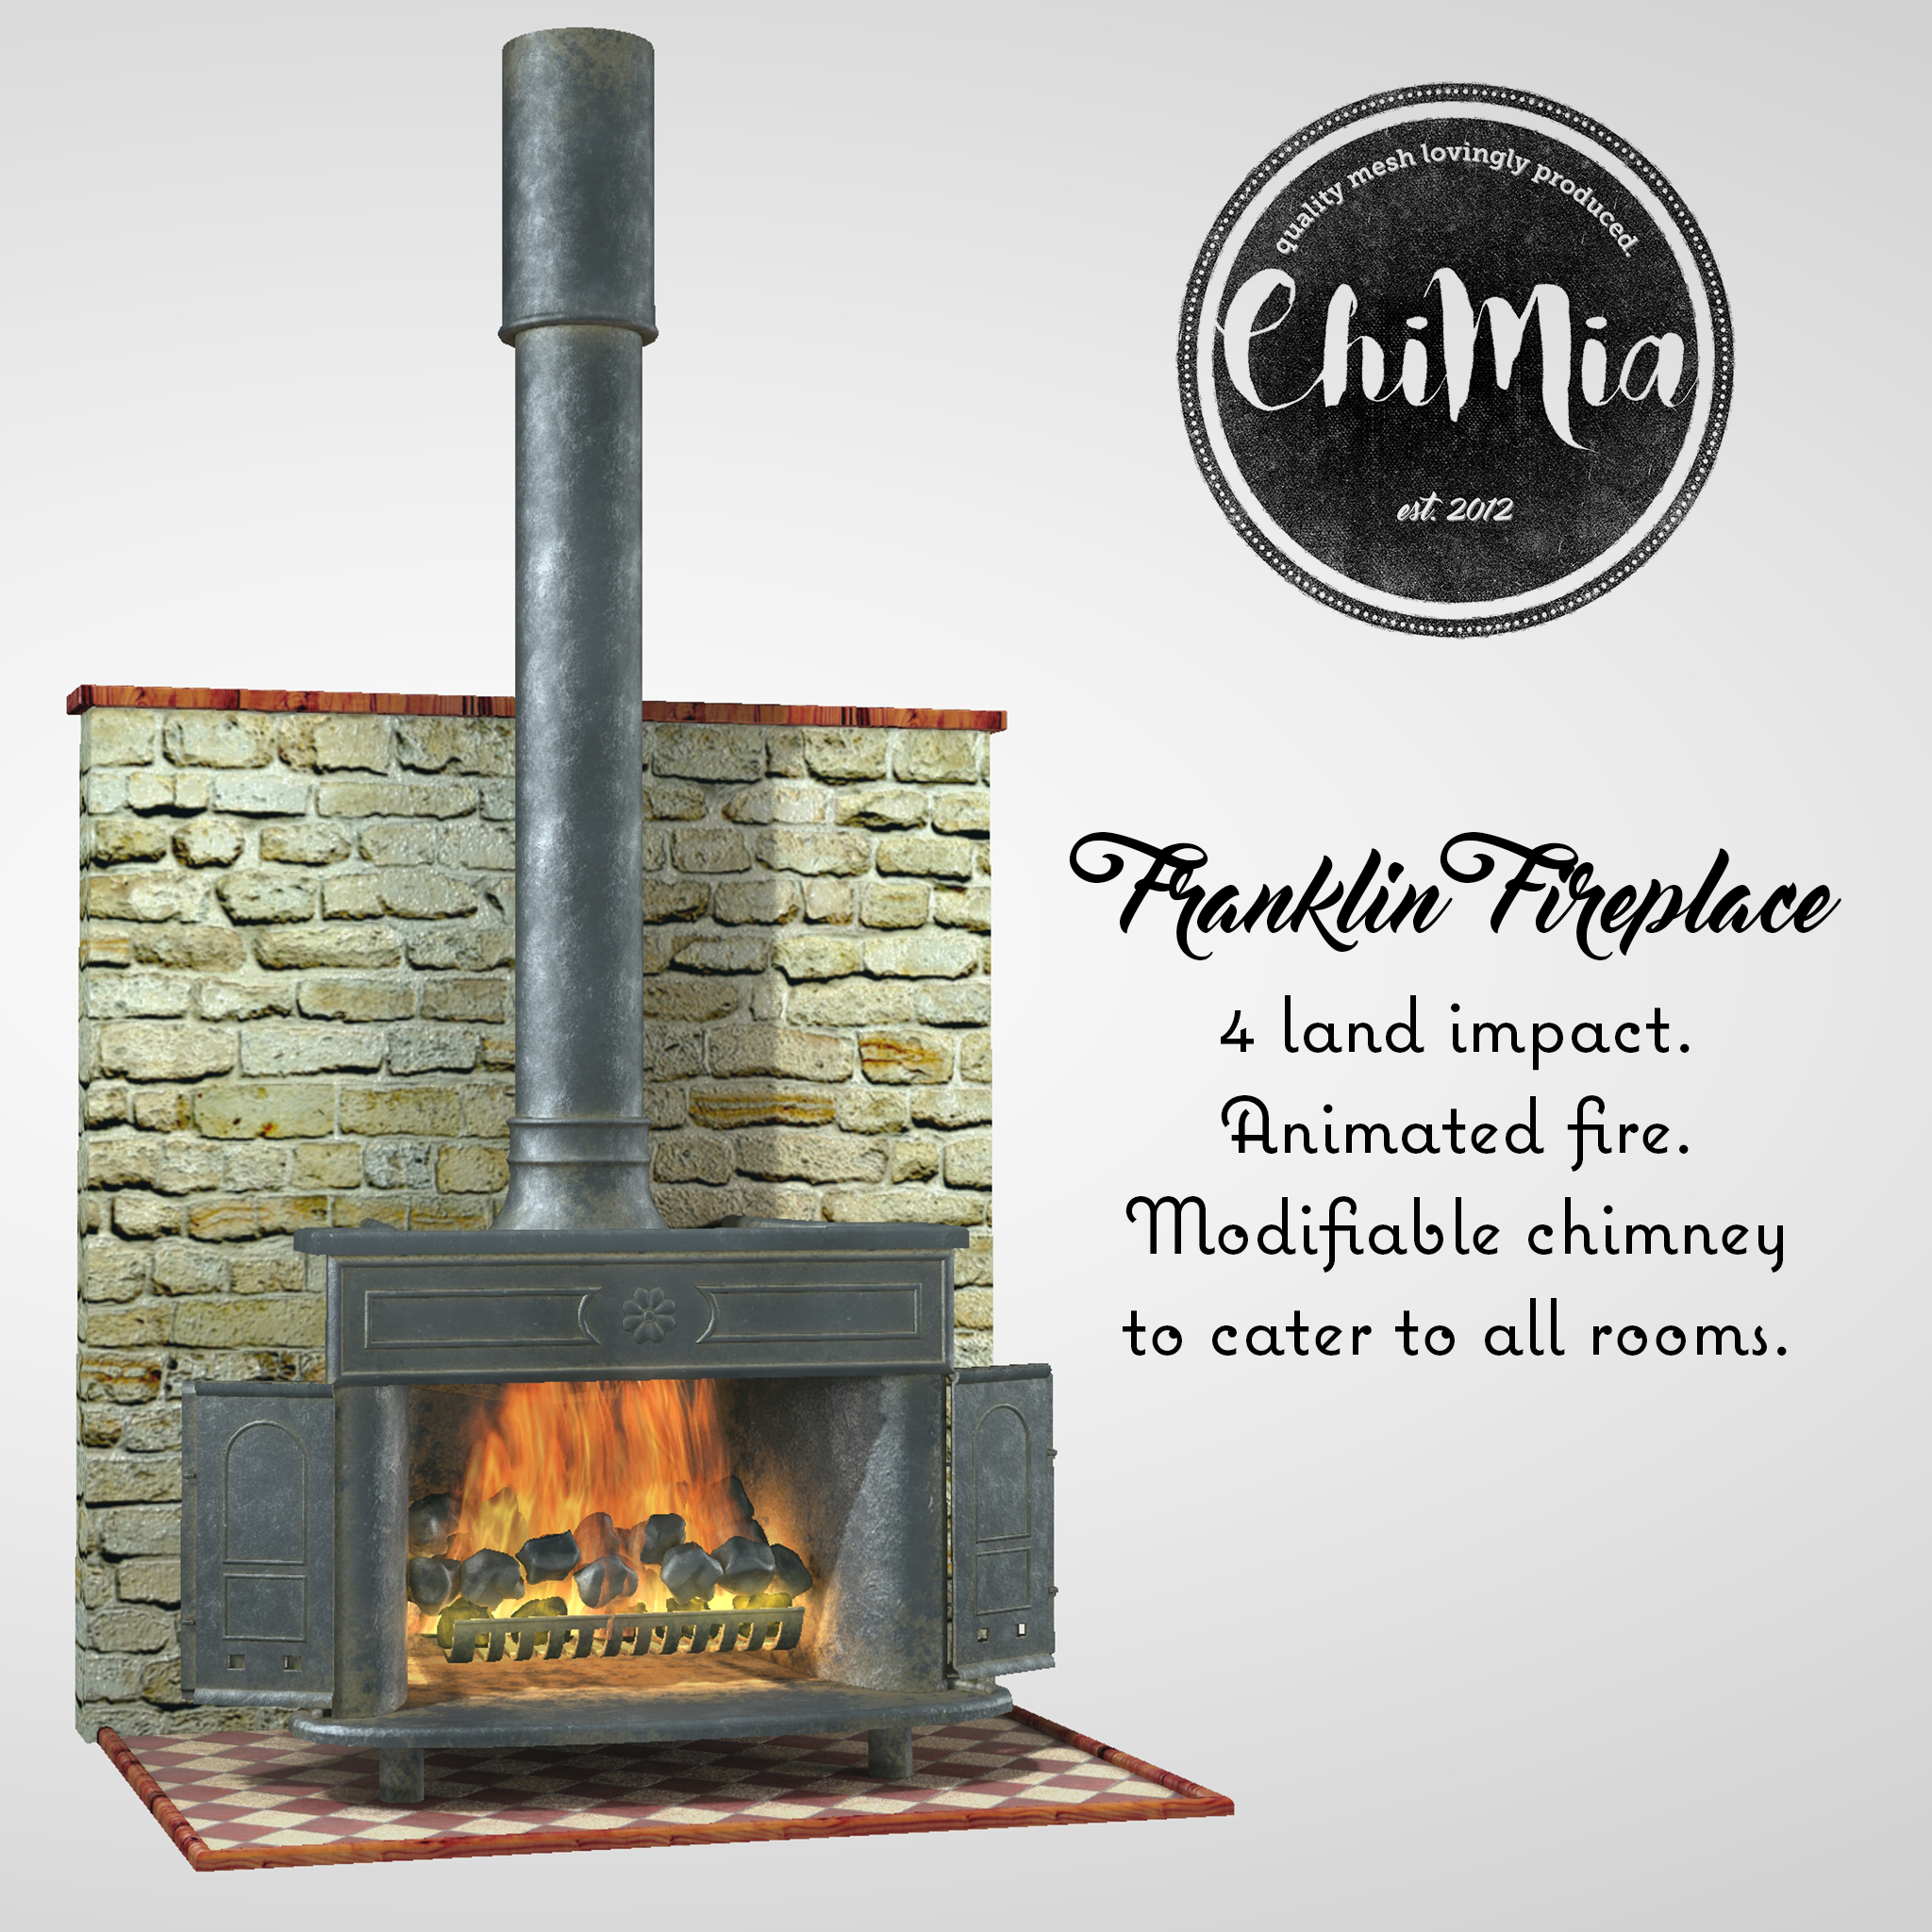 Franklin Fireplace for The Challenge